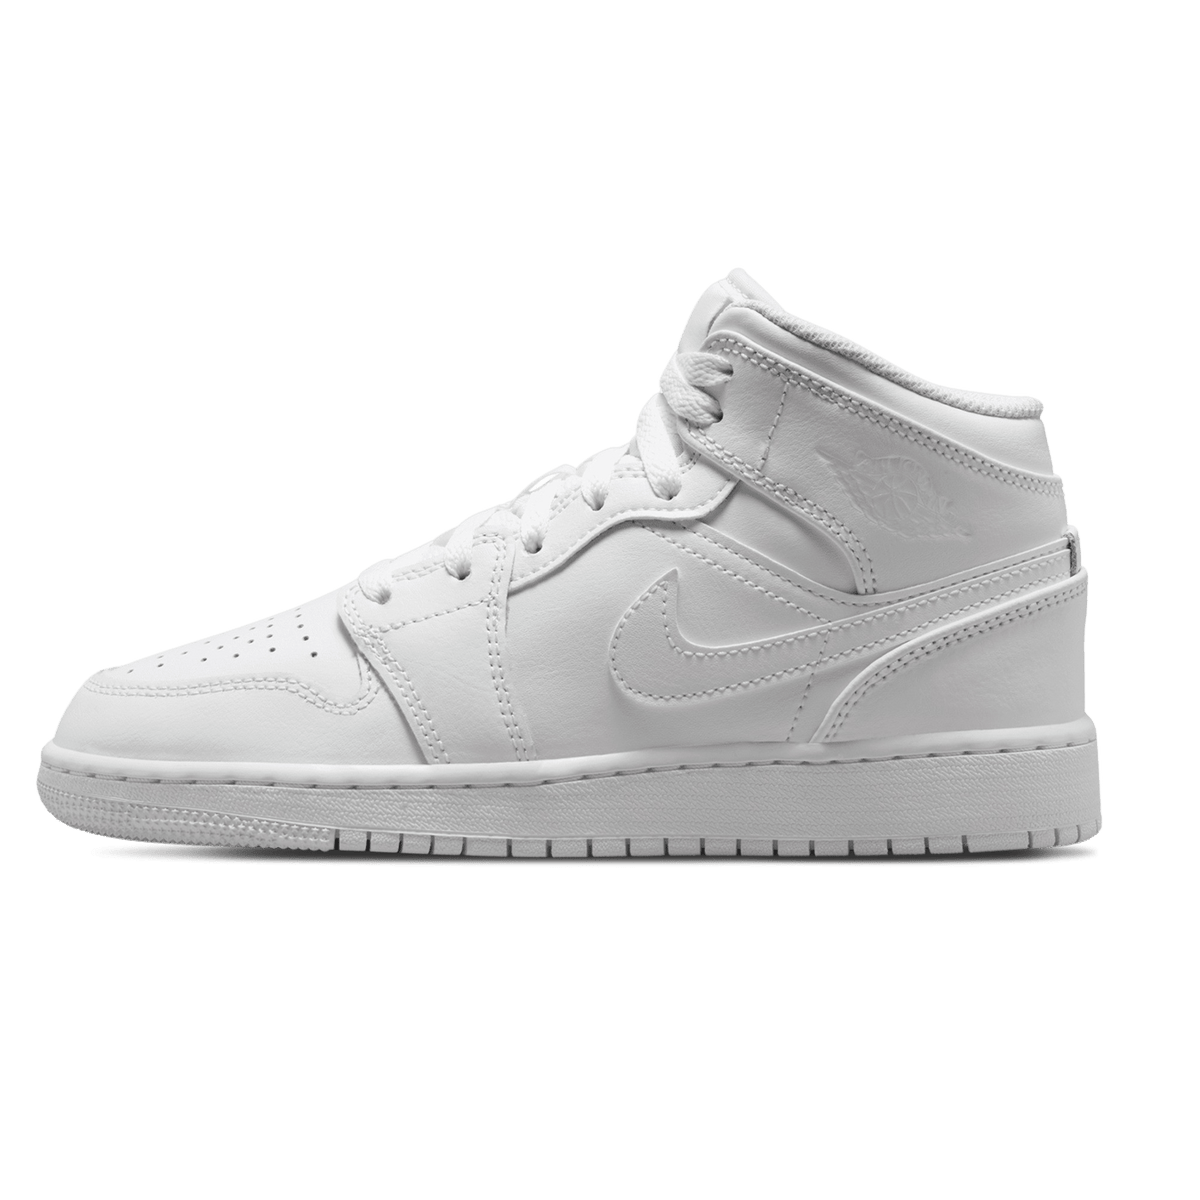 nike air baseline low price philippines shoes Mid GS 'Triple White' 2023 - JuzsportsShops